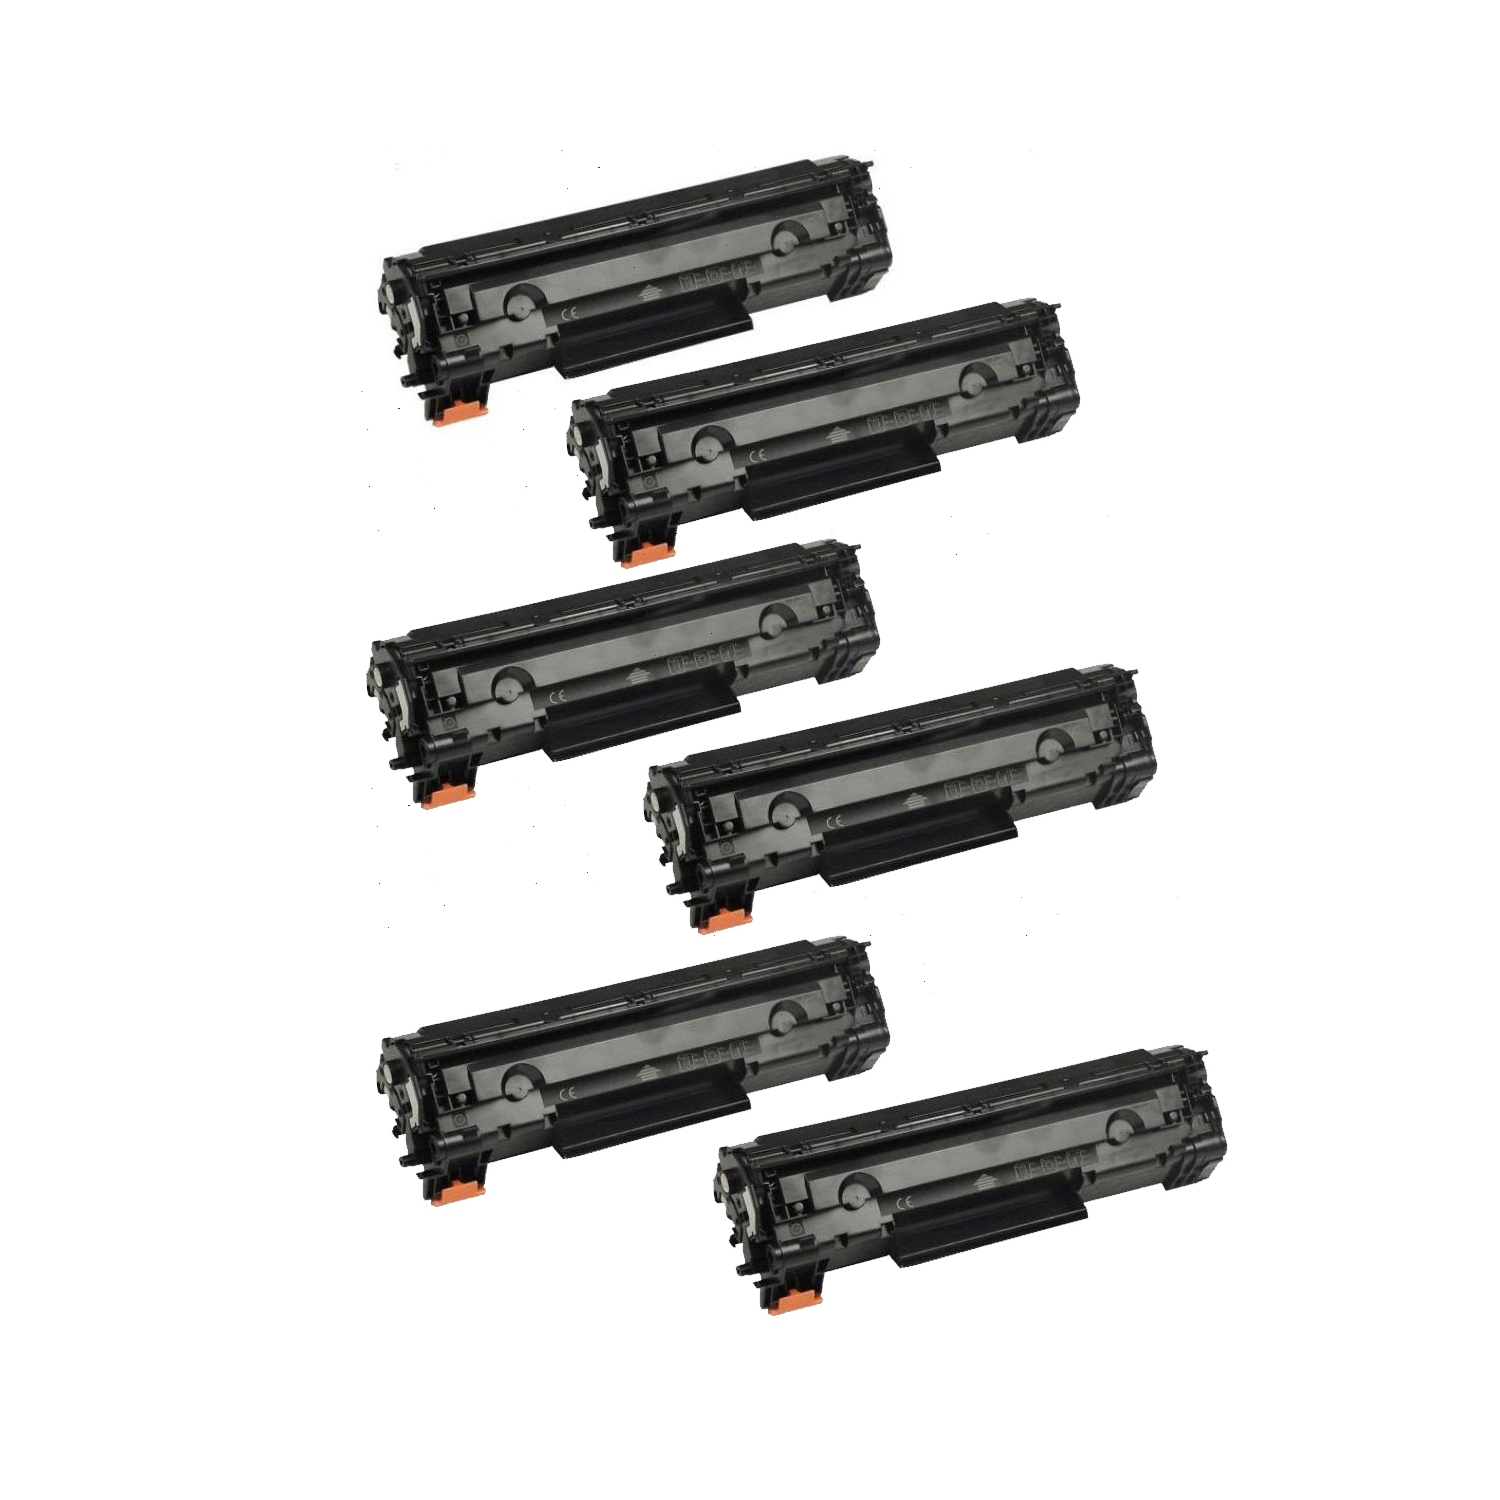 6 Packs CRG128 Compatible Toner Canon Cartridge for Canon128 3500B001AA ImageClass D530/D550,MF4412,MF4450,MF4570,MF4580,MF4770,MF4880,MF4890